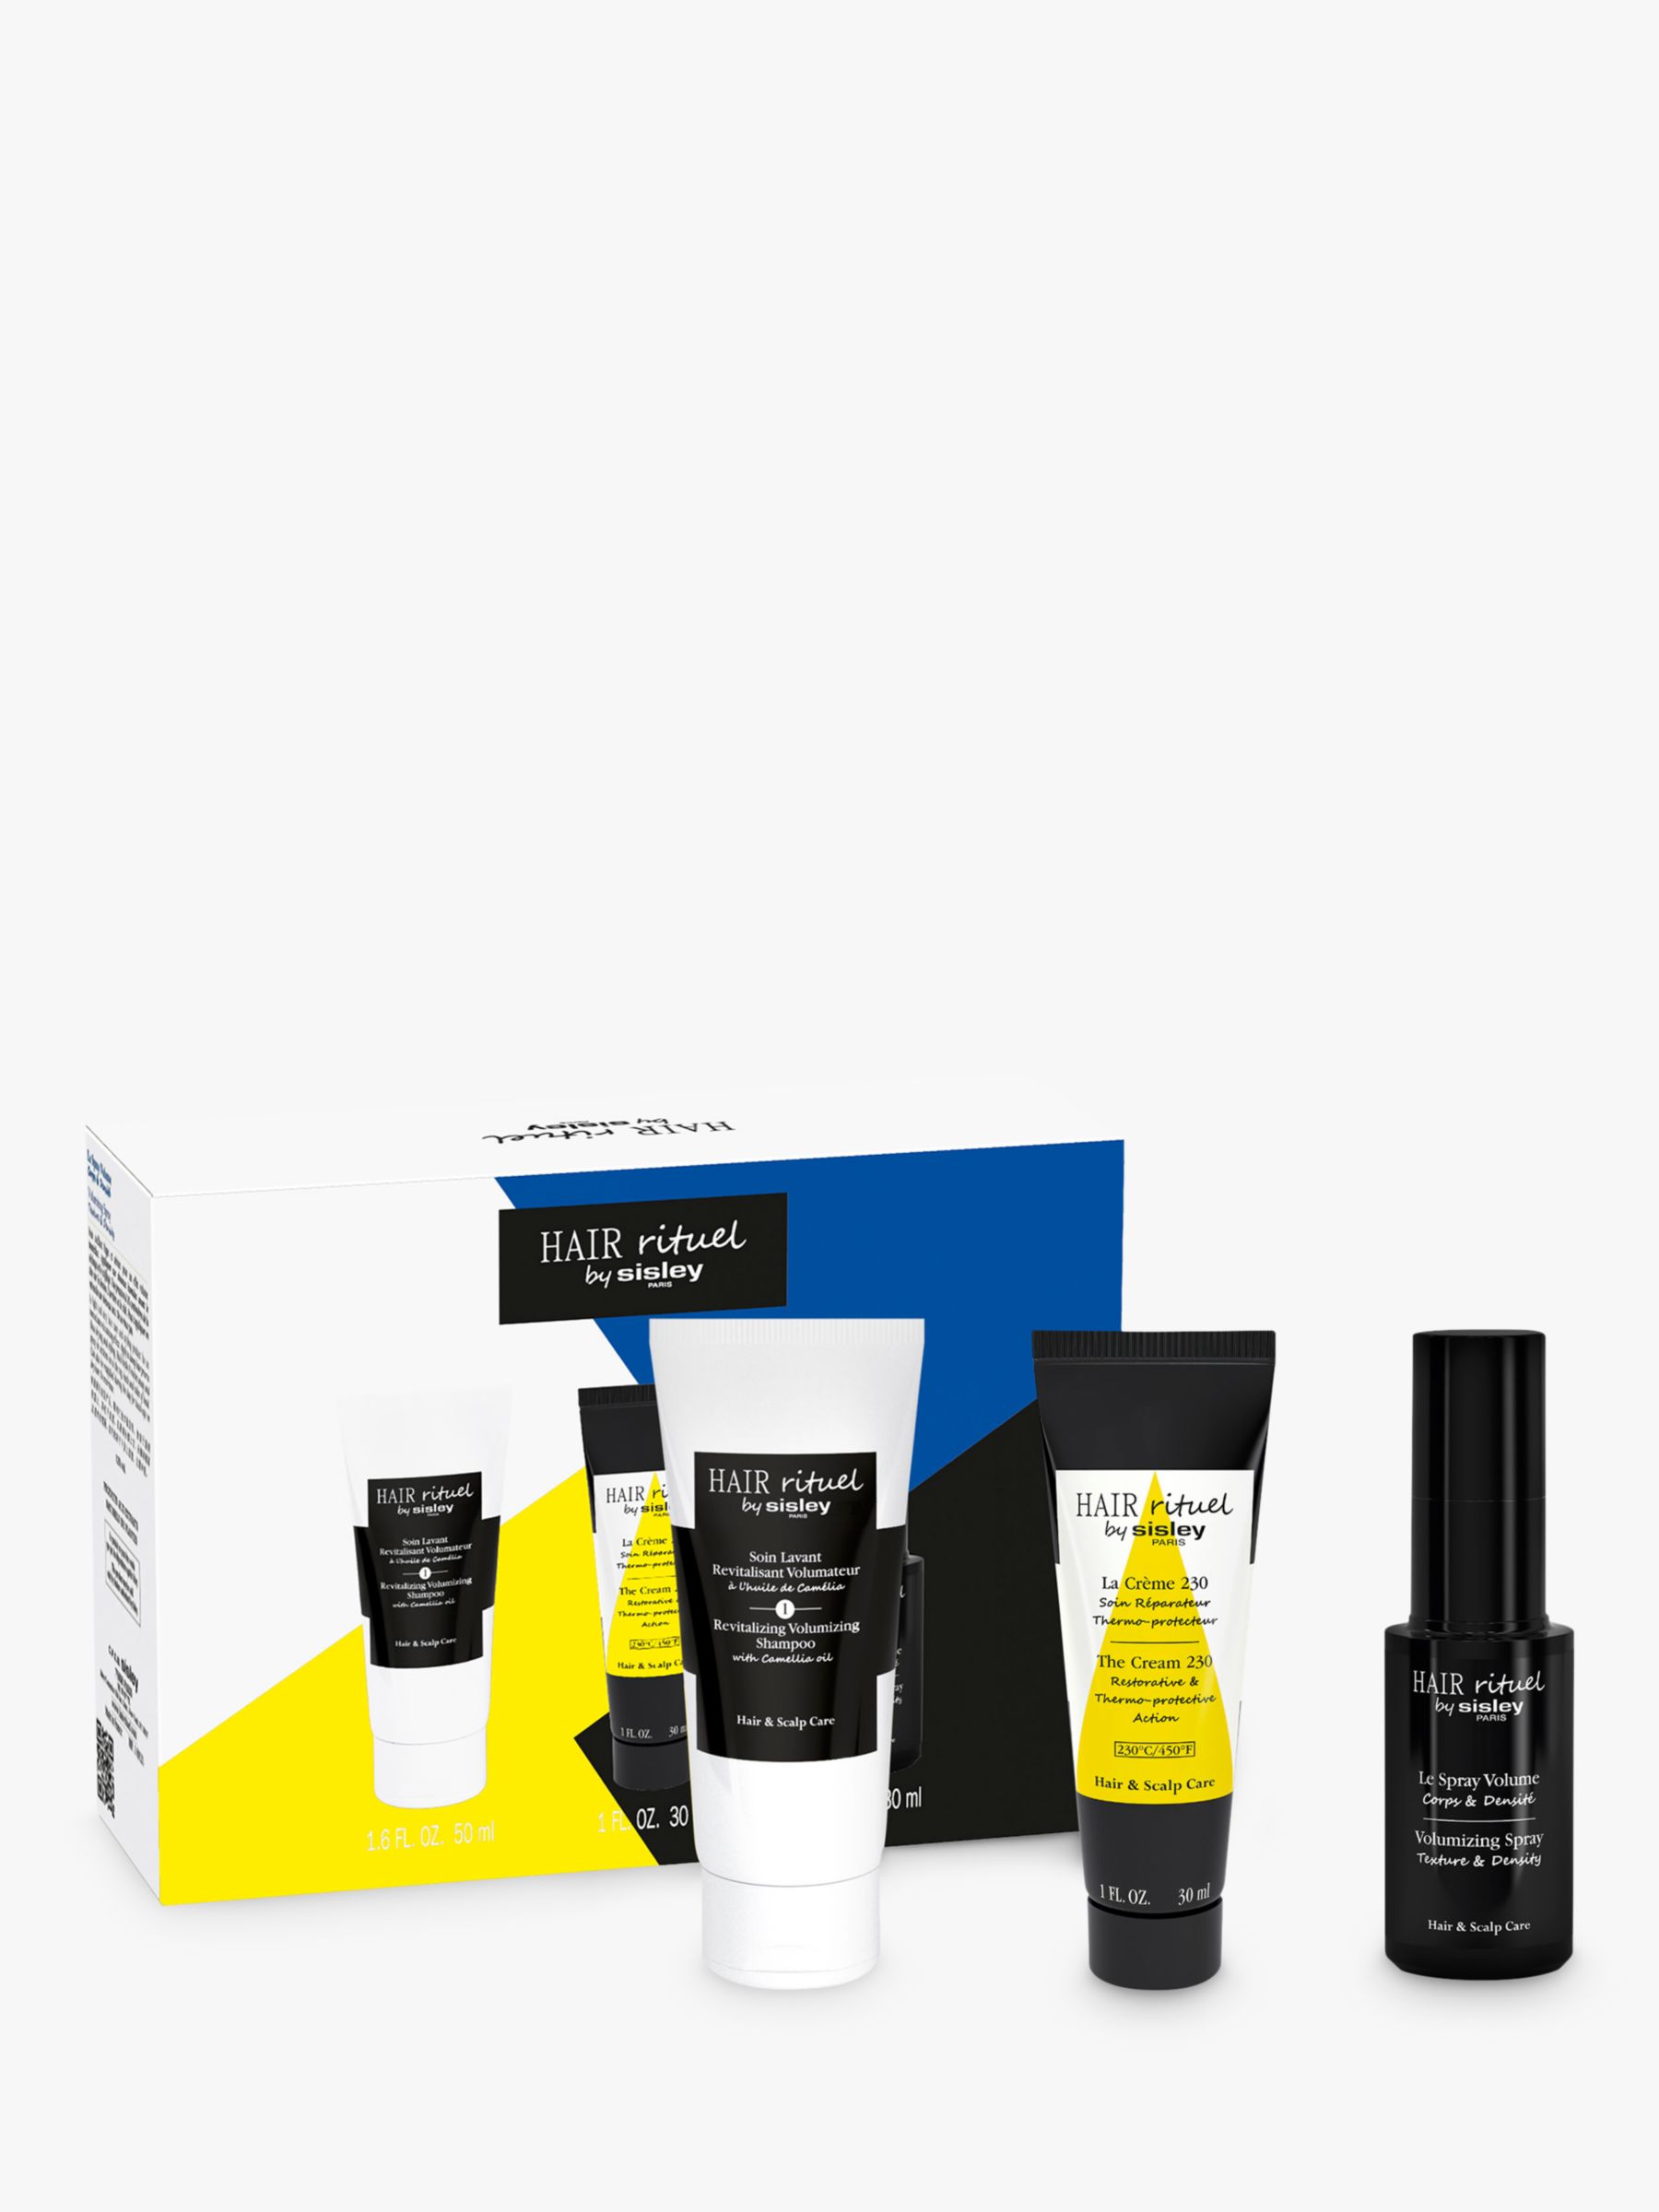 Sisley-Paris Pump Up The Volume Discovery Haircare Gift Set